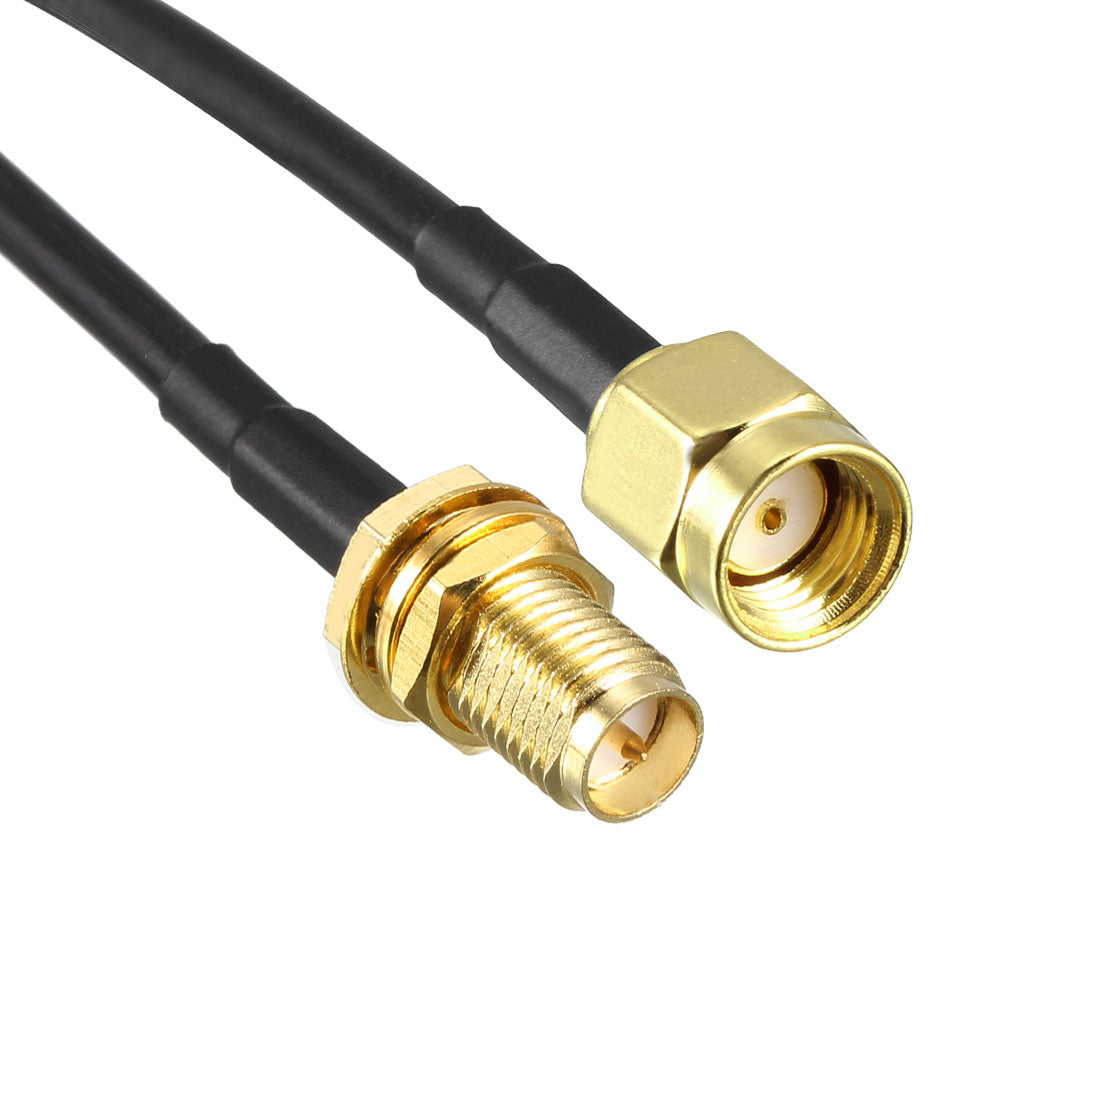 Uxcell Uxcell Antenna Extension Cable RP-SMA Male to RP-SMA Female Low Loss RG174 8 Ft